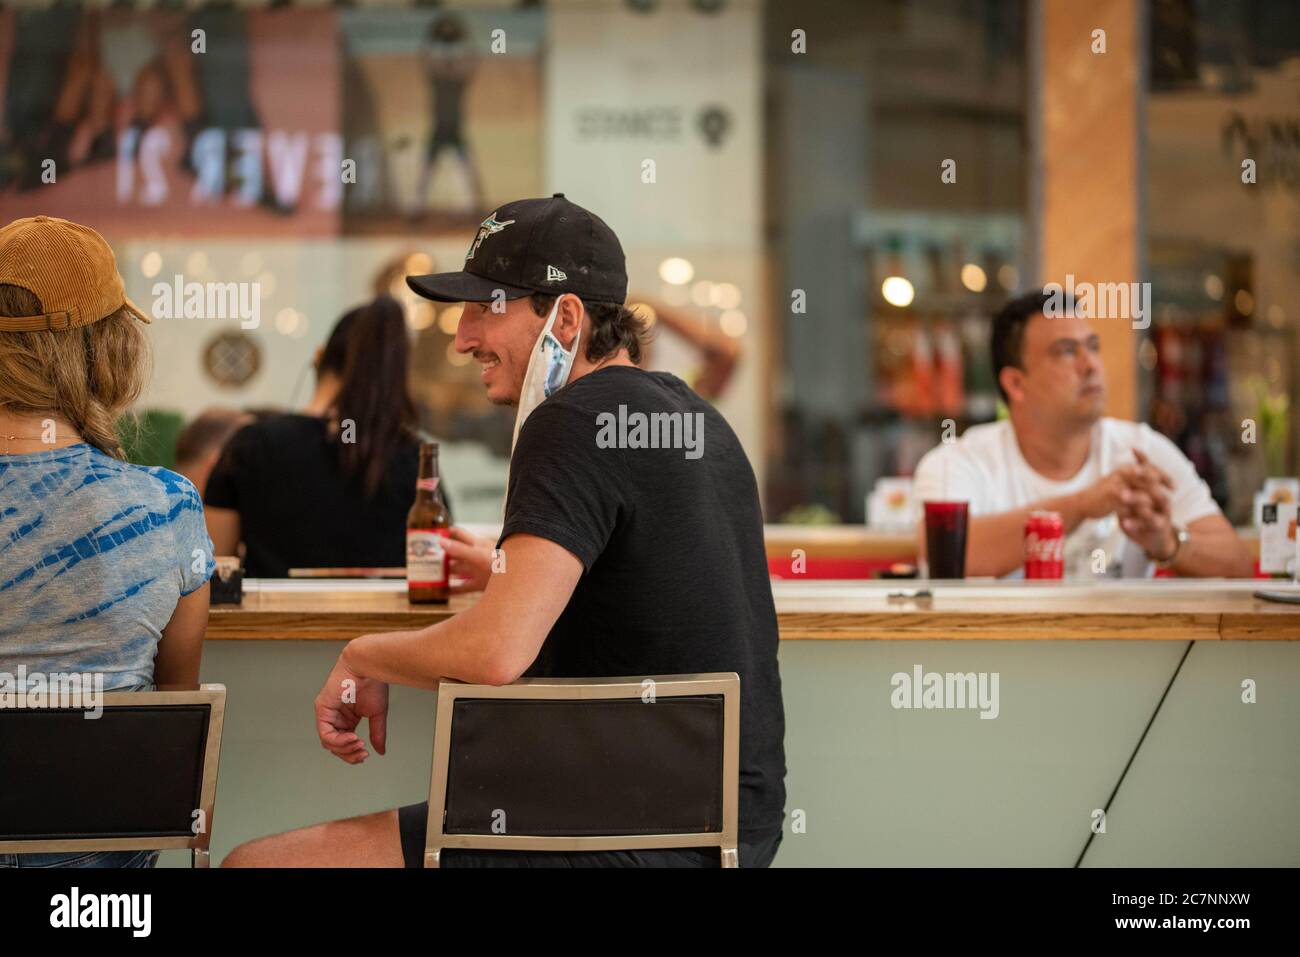 Sunrise, Florida, USA. 18th July, 2020. Shoppers dine at the food court at Sawgrass Mills Mall in Florida despite record high number of new Covid-19 cases in the state this week Credit: Orit Ben-Ezzer/ZUMA Wire/Alamy Live News Stock Photo